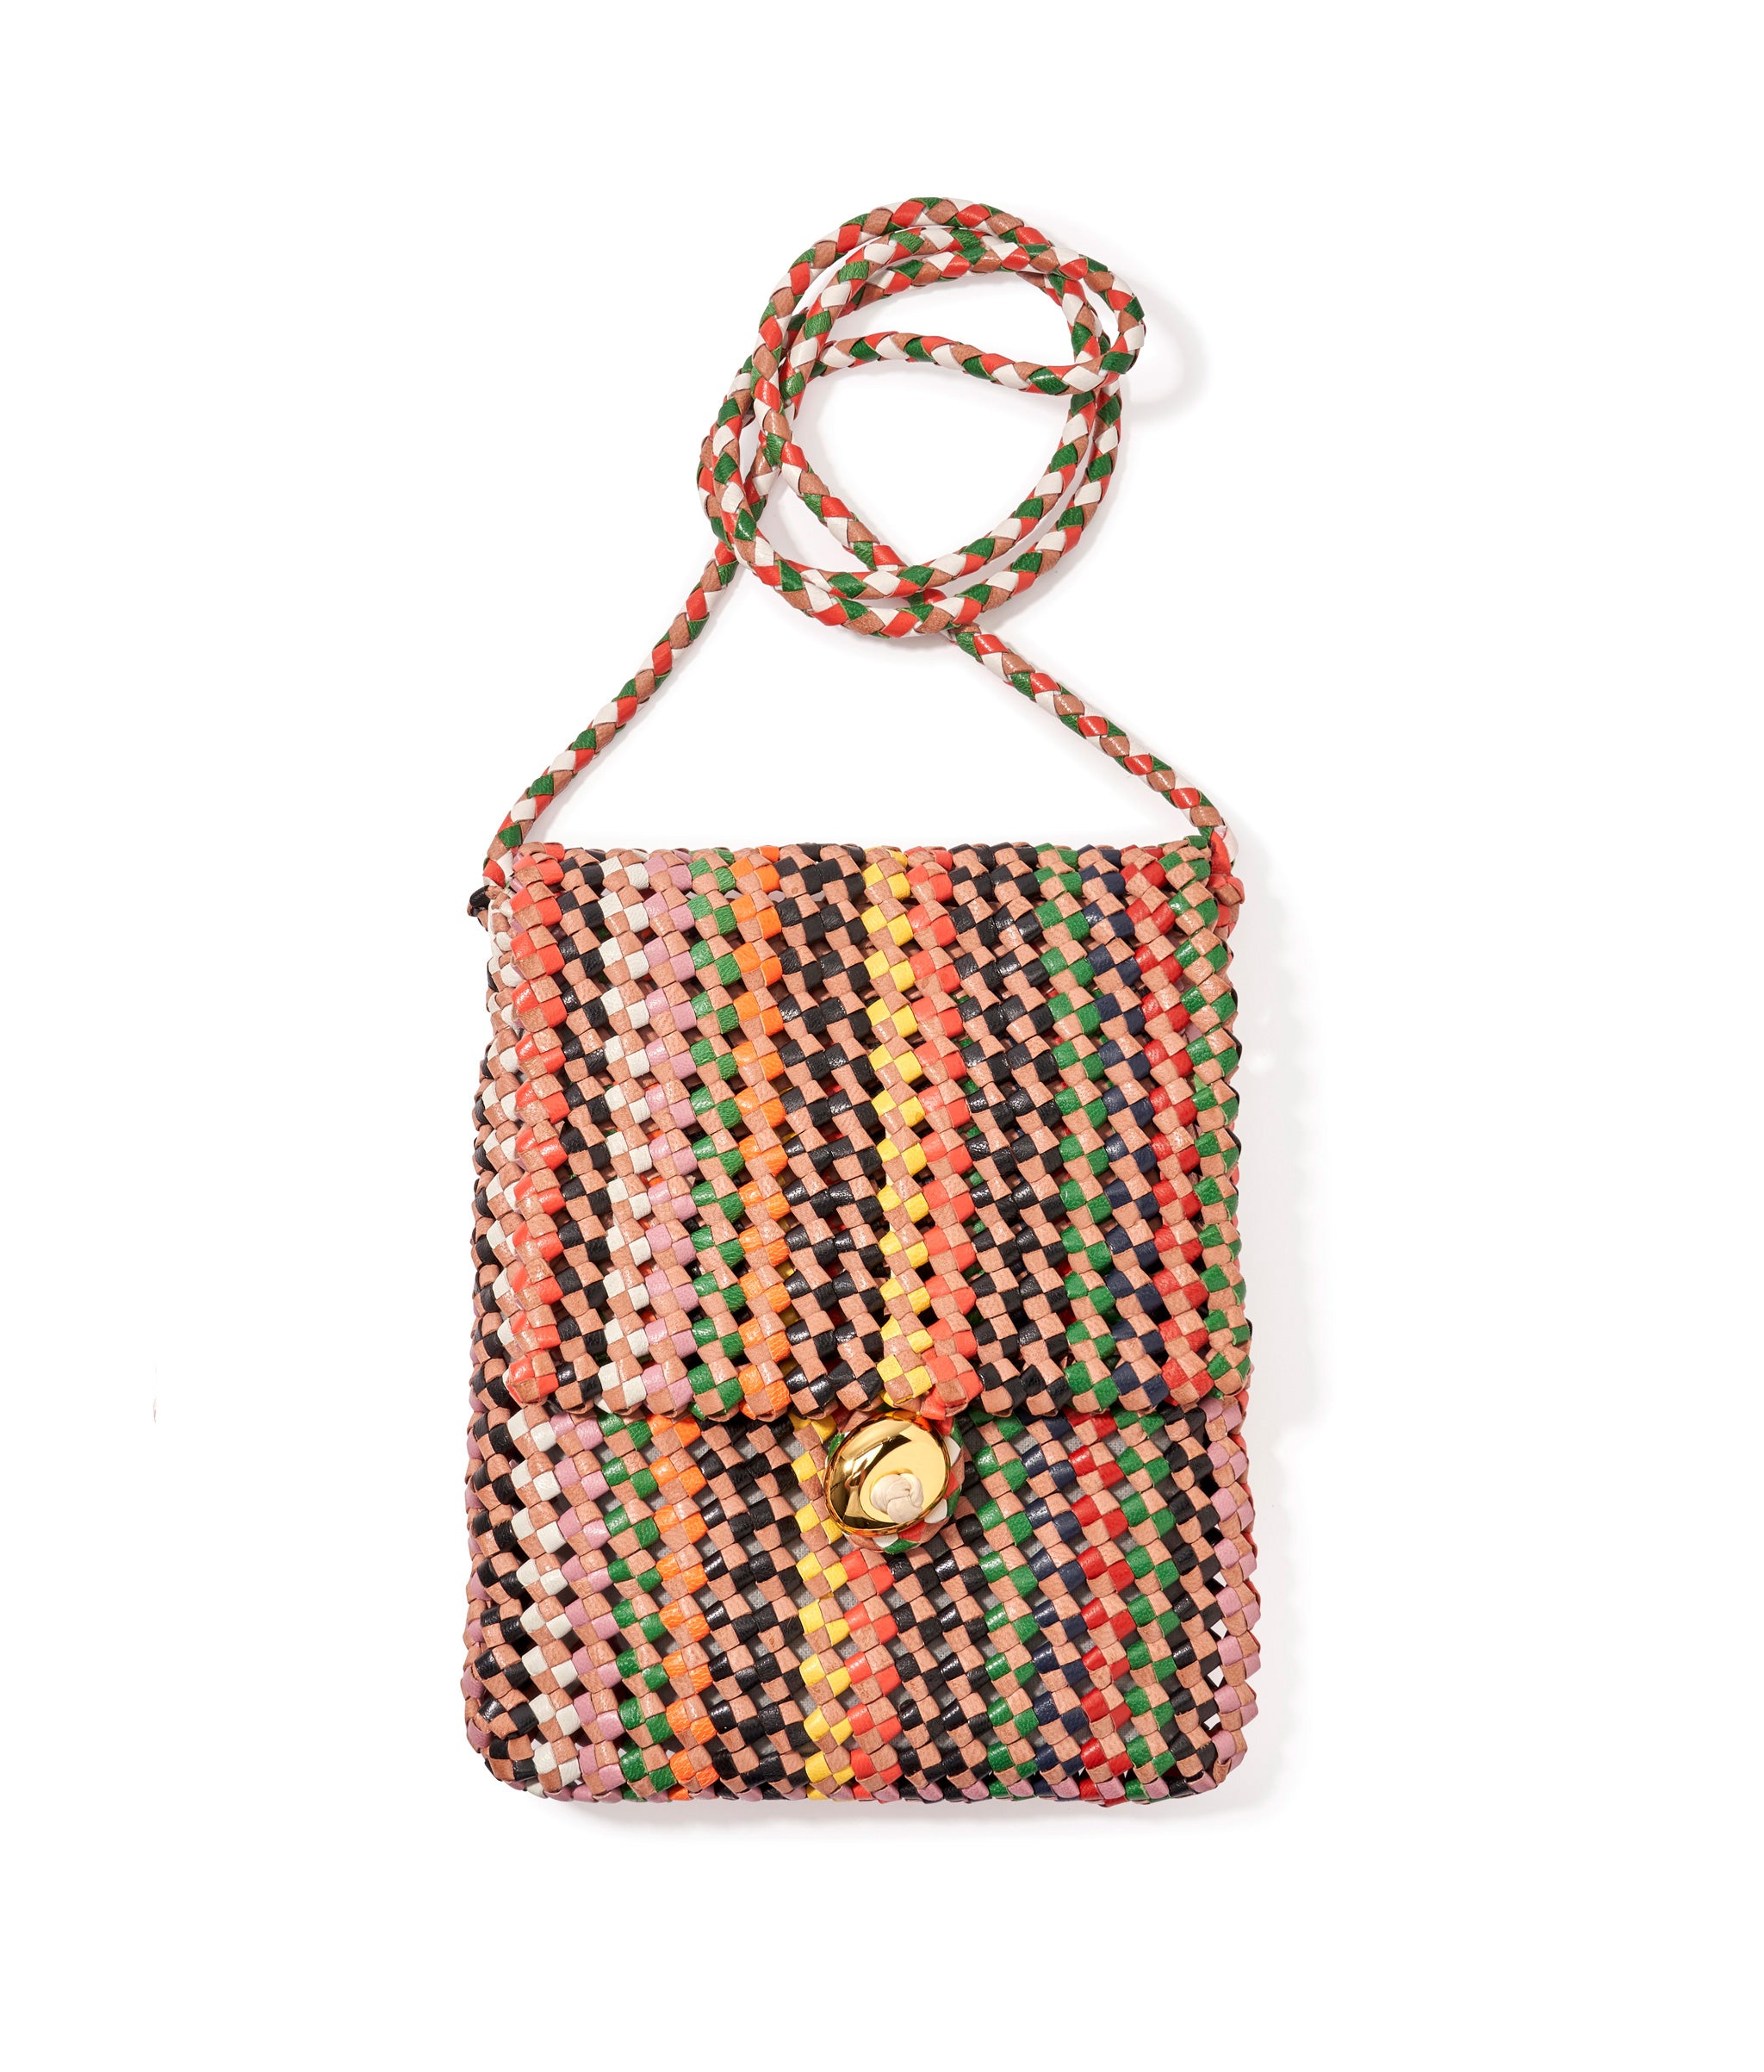 Goa Crossbody in Primary Multi. Woven leather crossbody bag, tan and primary stripes, oversized gold bead closure.